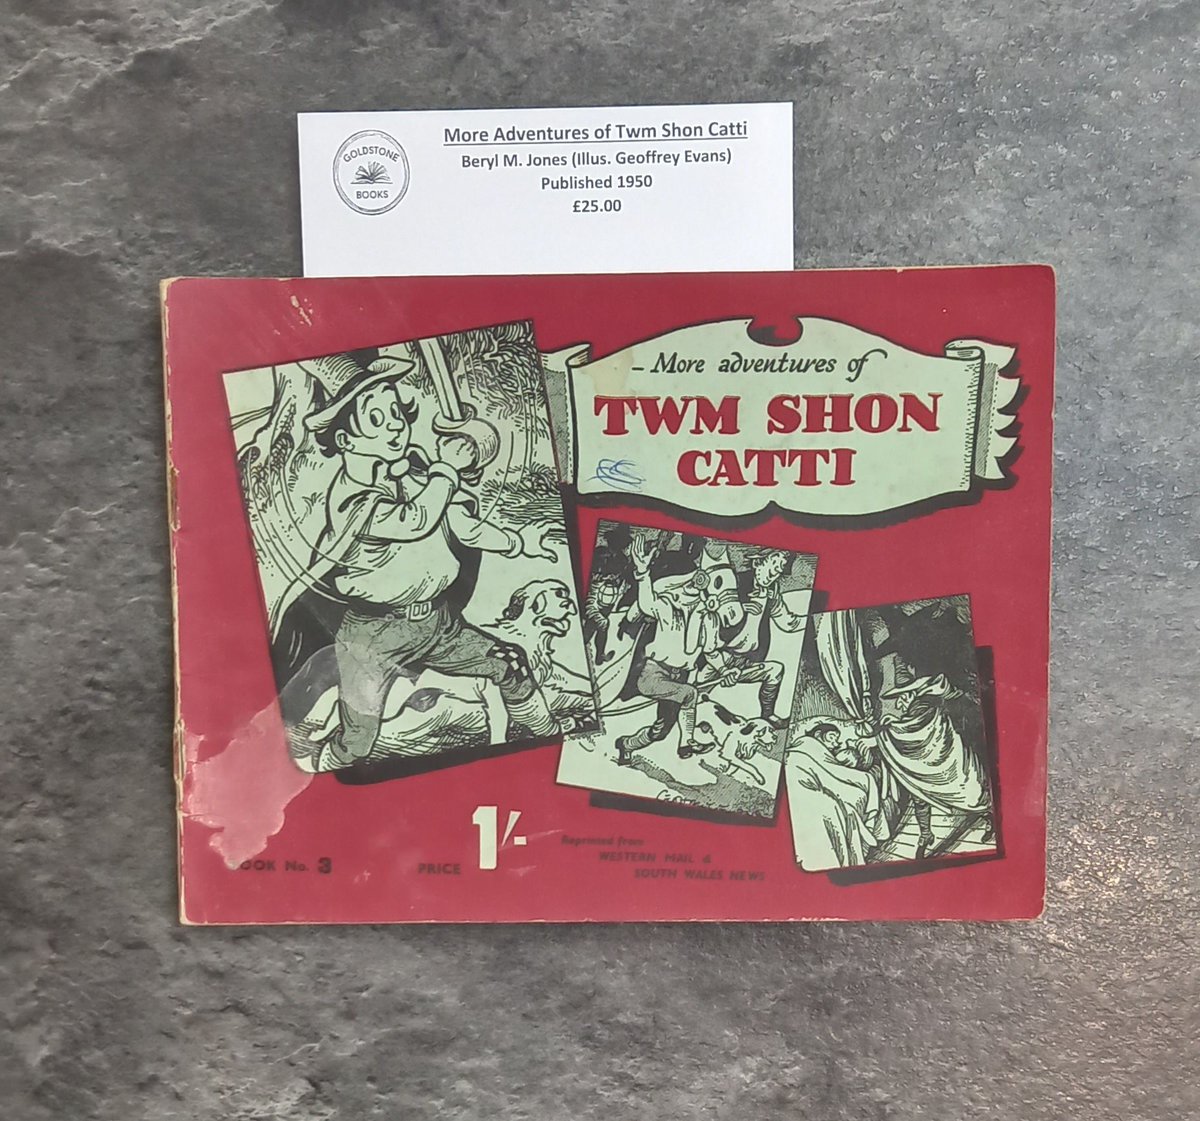 More Adventures of Twm Shon Catti, published in 1950 for £25. #GoldstoneBooks #WelshWednesday #Wales #Cymru